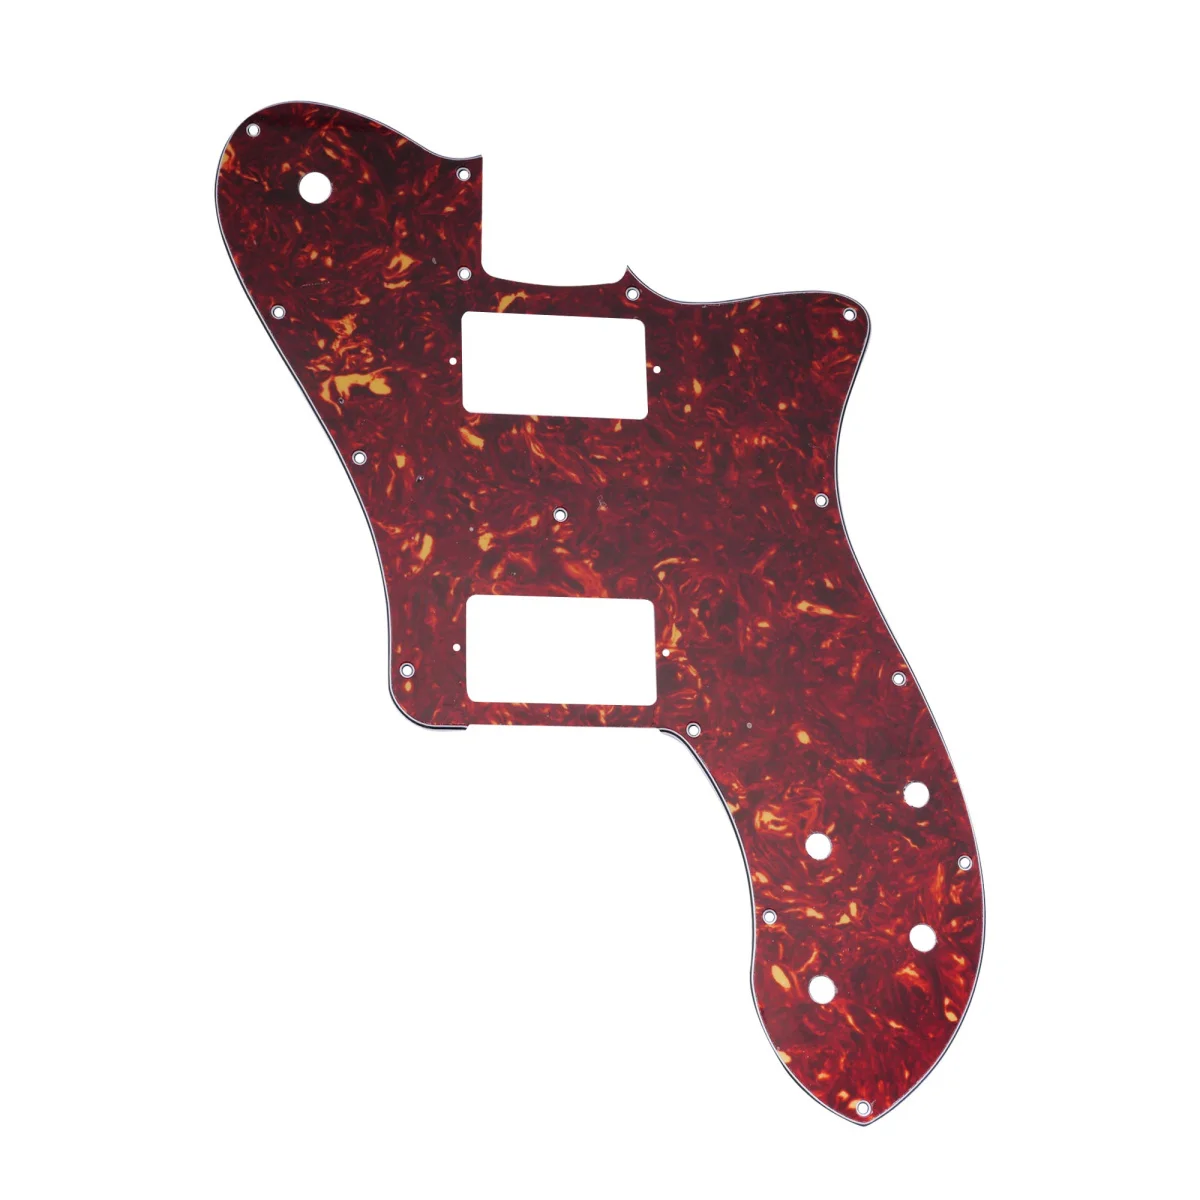 

Musiclily Pro 15 Holes Covered HH Guitar Pickguard for Mexico Fender 72 Tele Deluxe Style Electric Guitar,4ply Vintage Tortoise